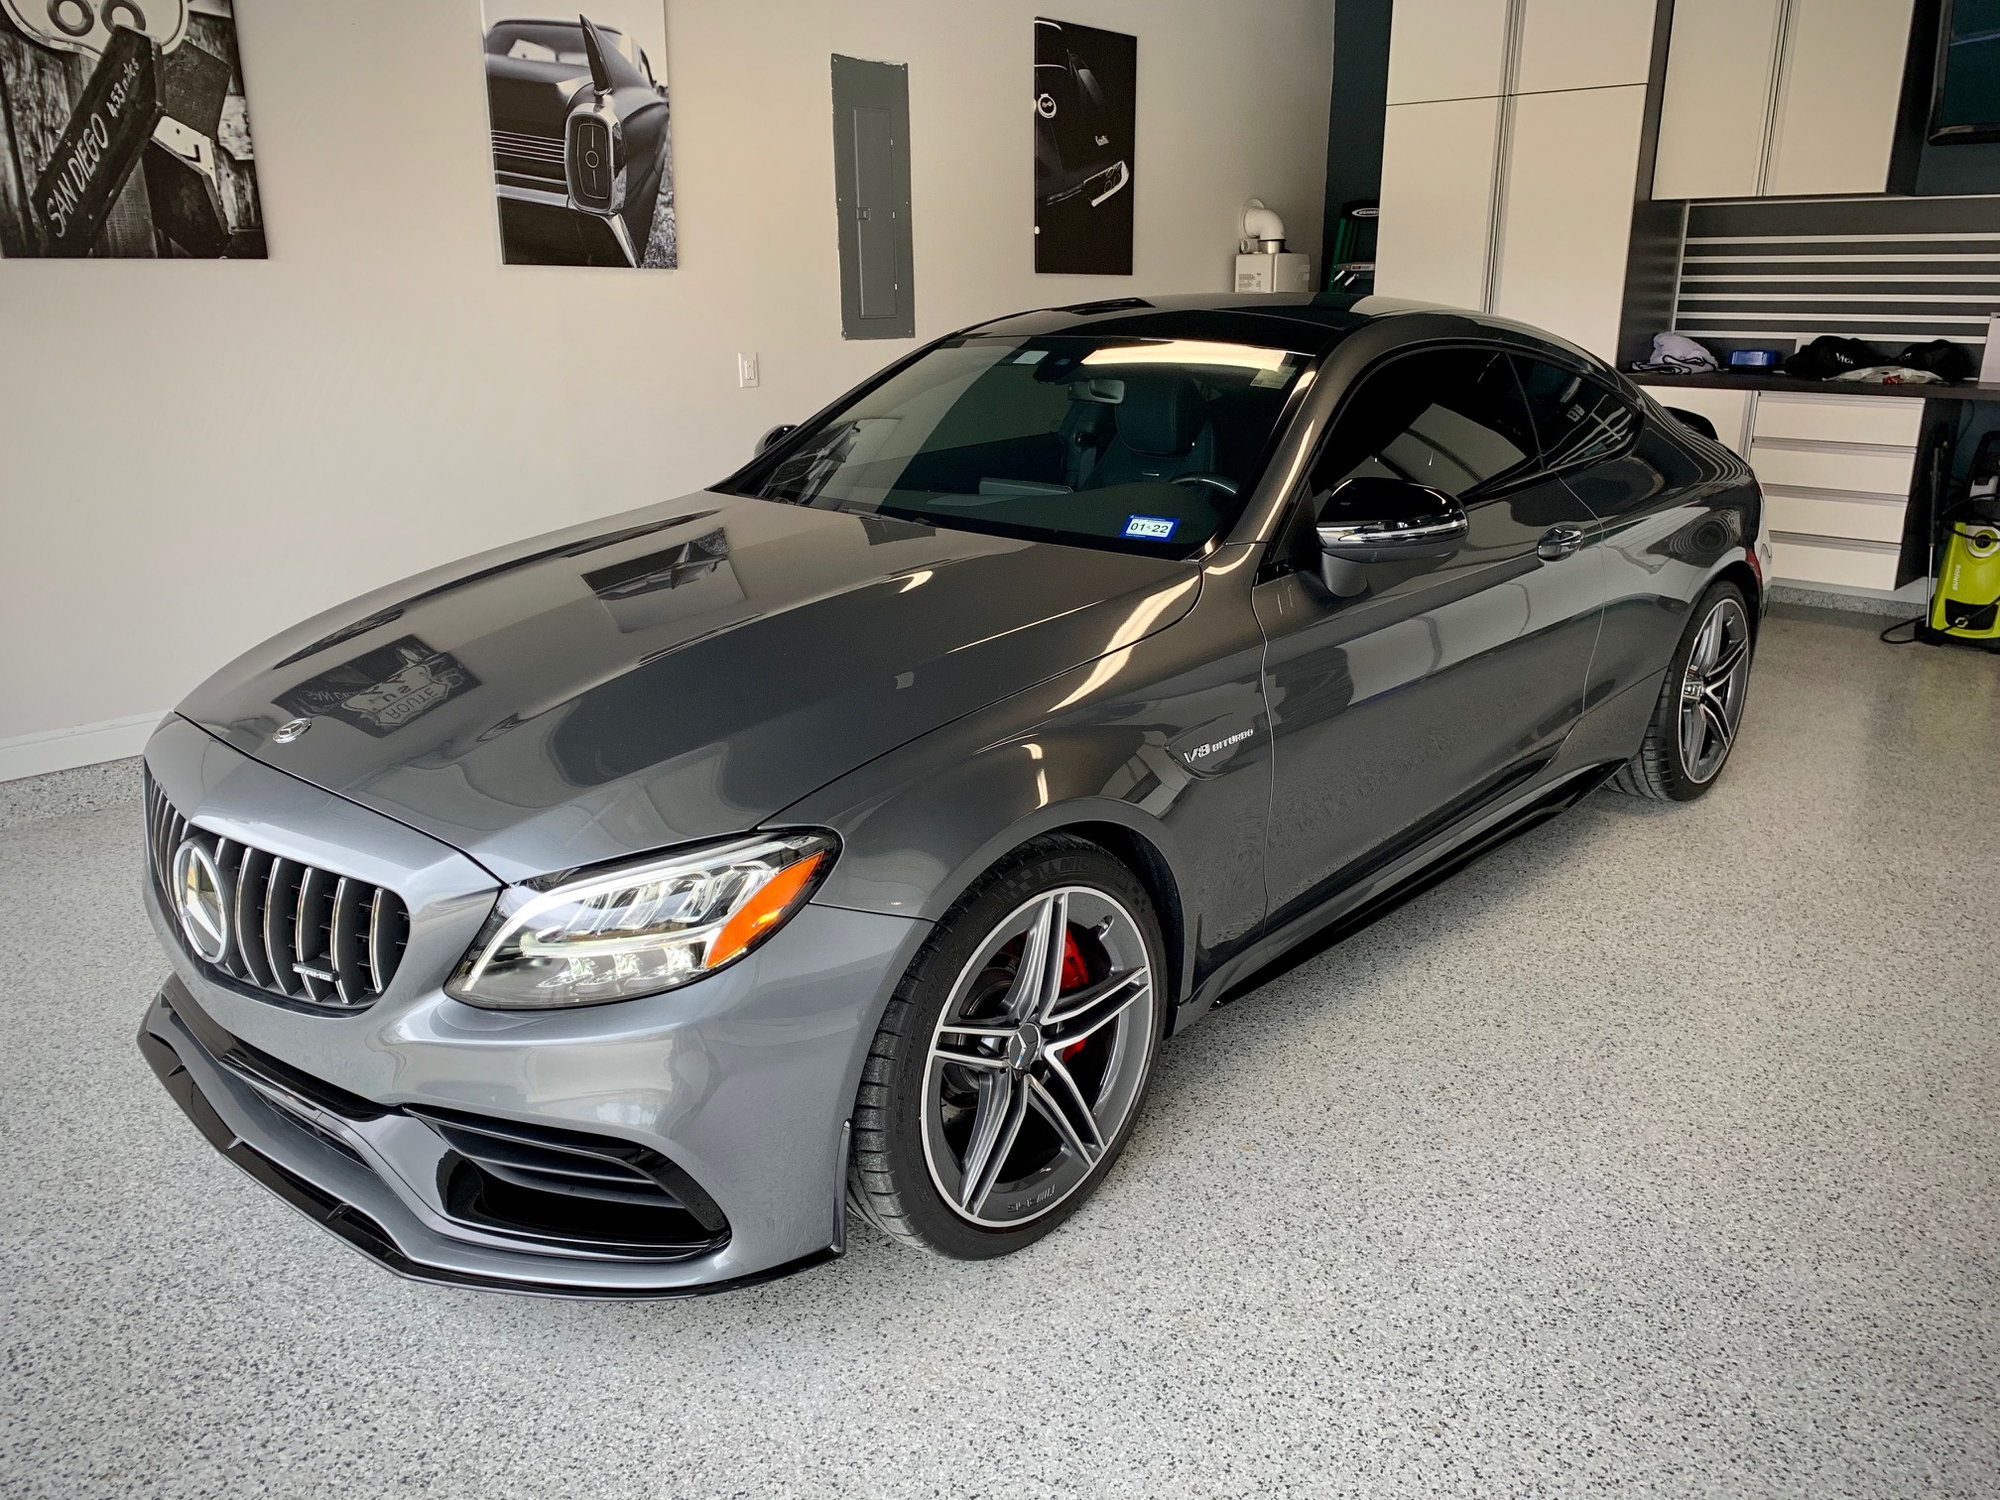 Amg C 63 S Coupe Lease Takeover Mbworld Org Forums